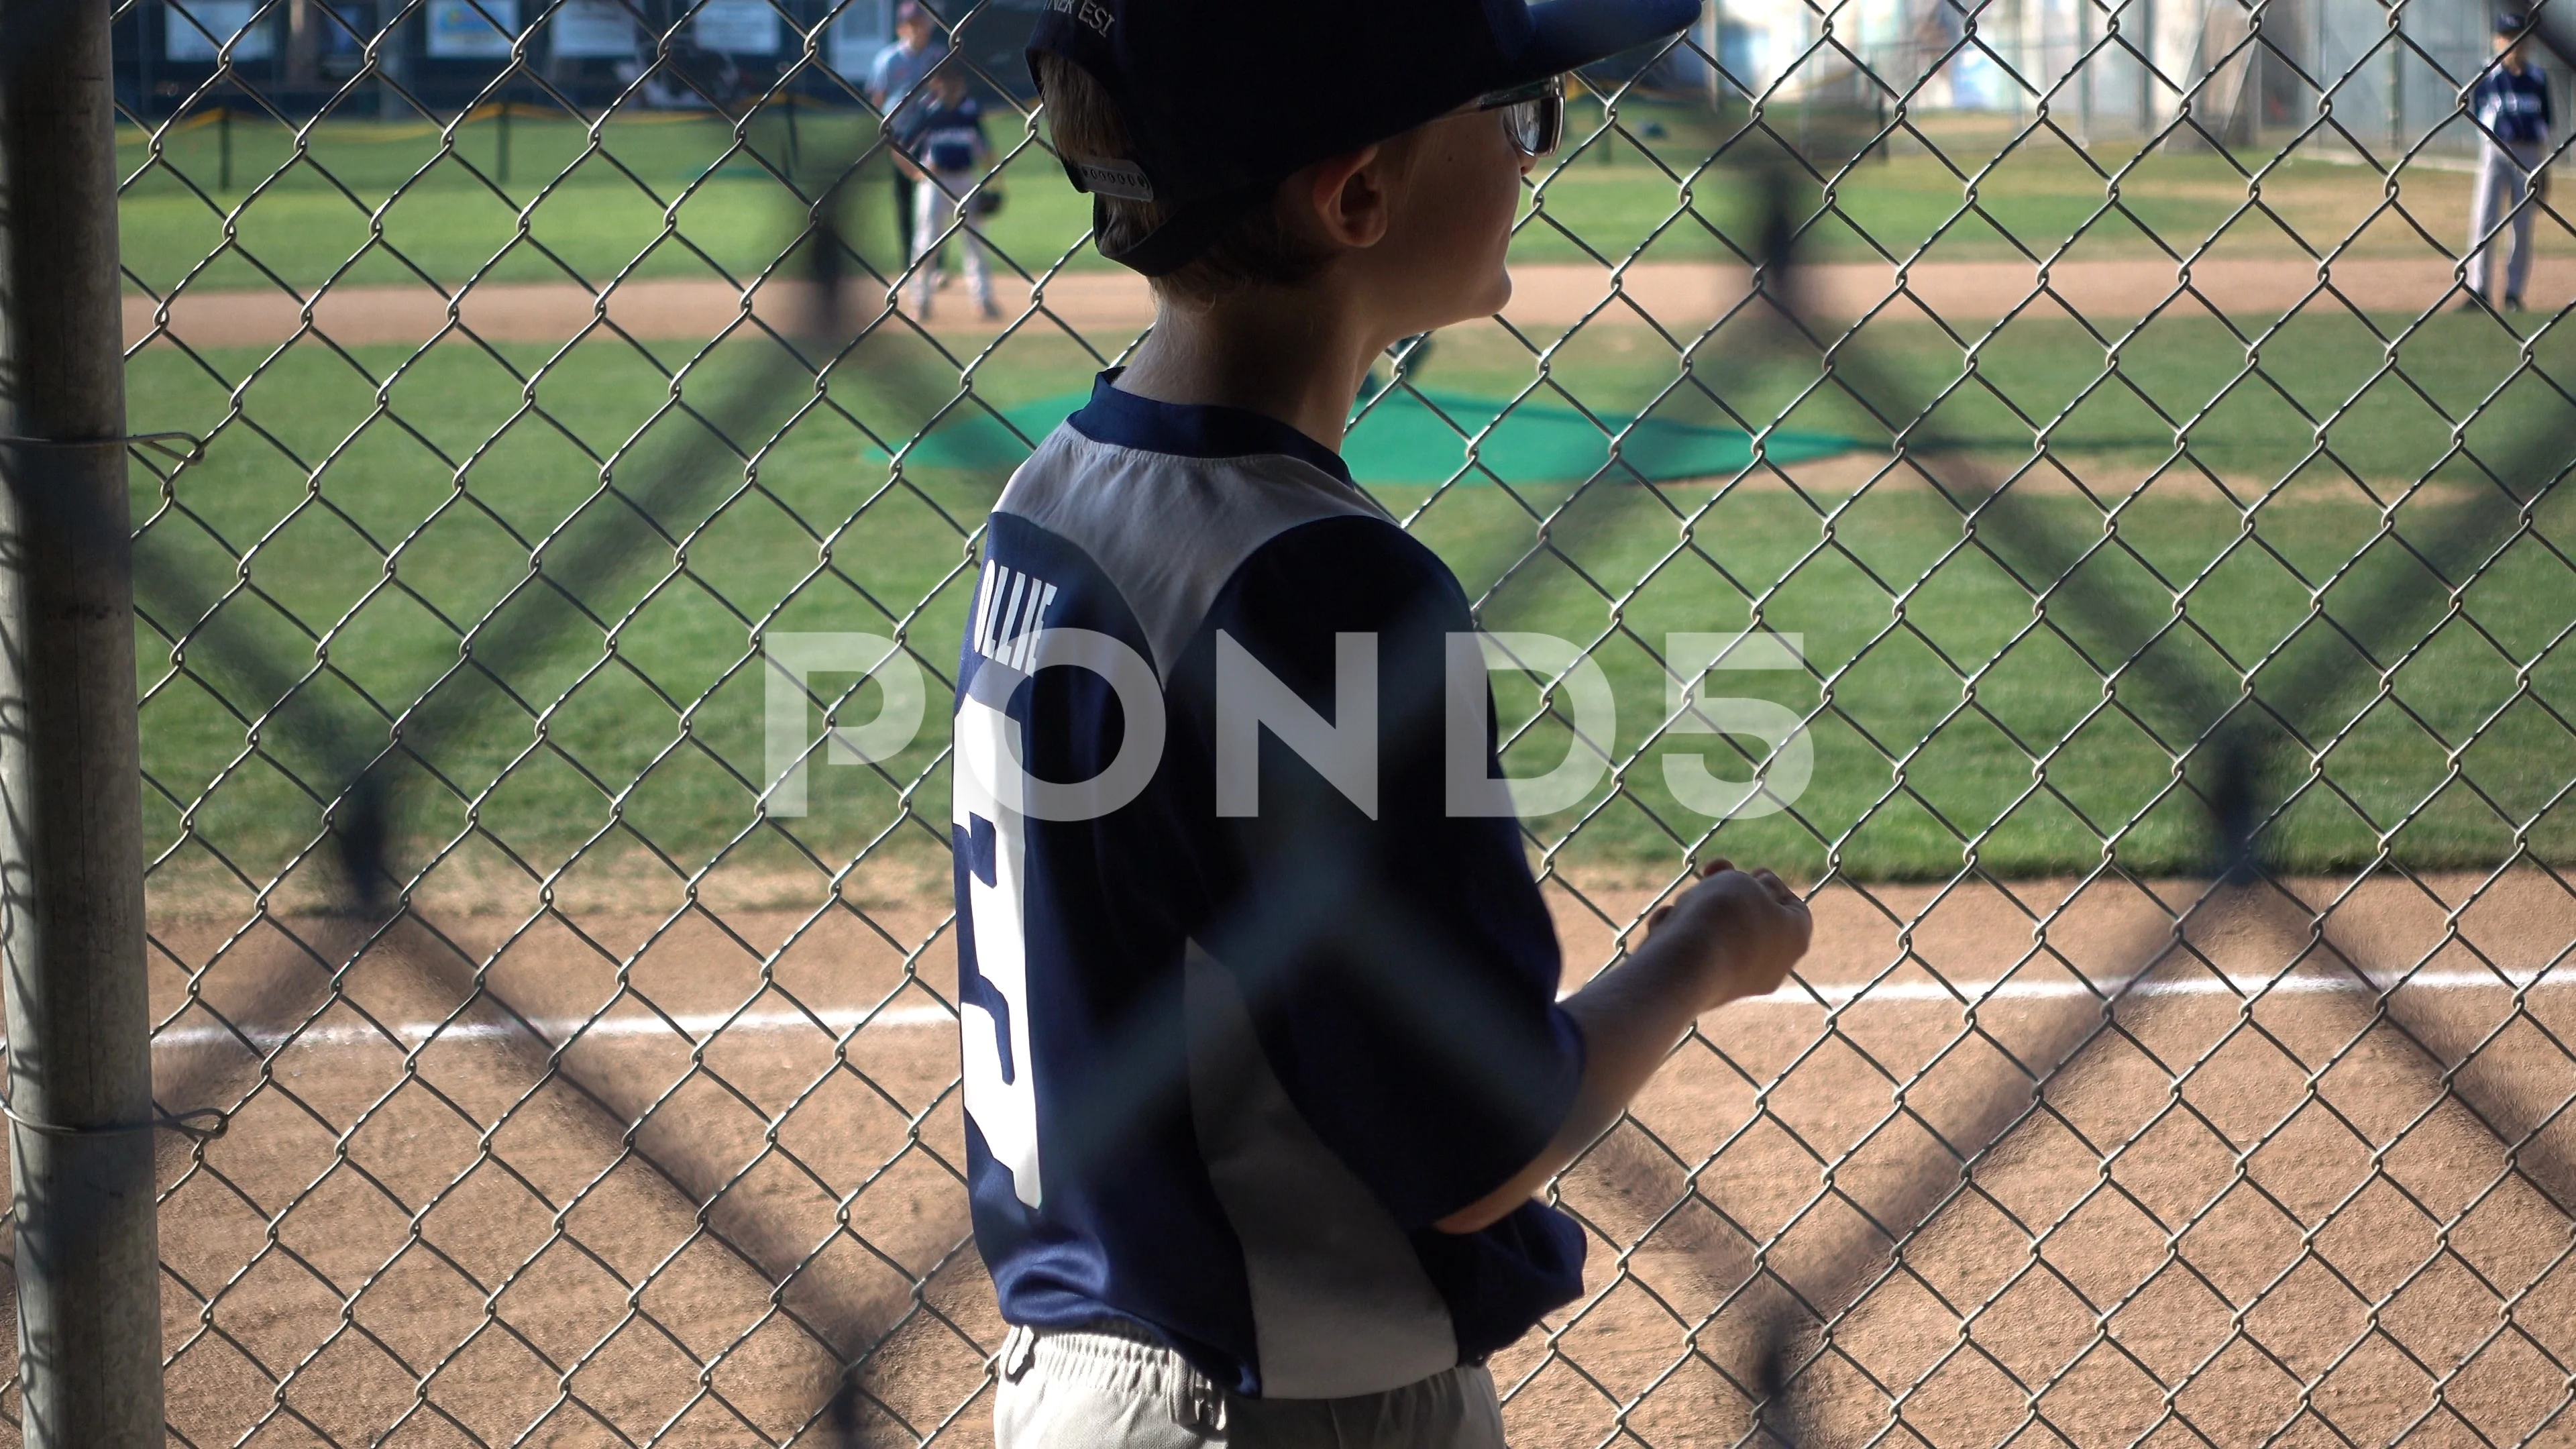 Youth Baseball Player Behind The Dugout Fence During A Game In